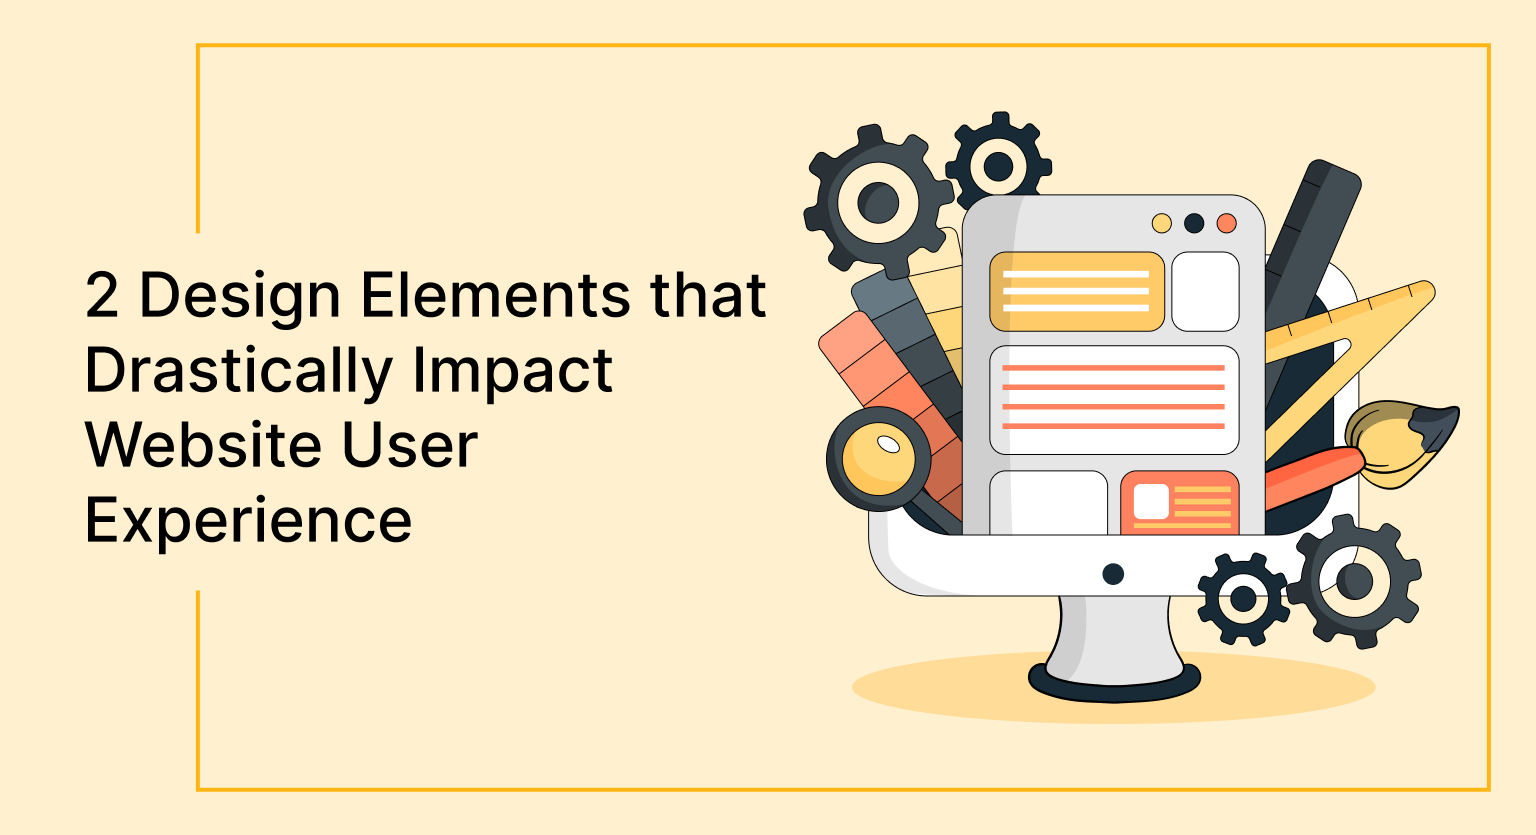 2 Design Elements that Drastically Impact Website User Experience